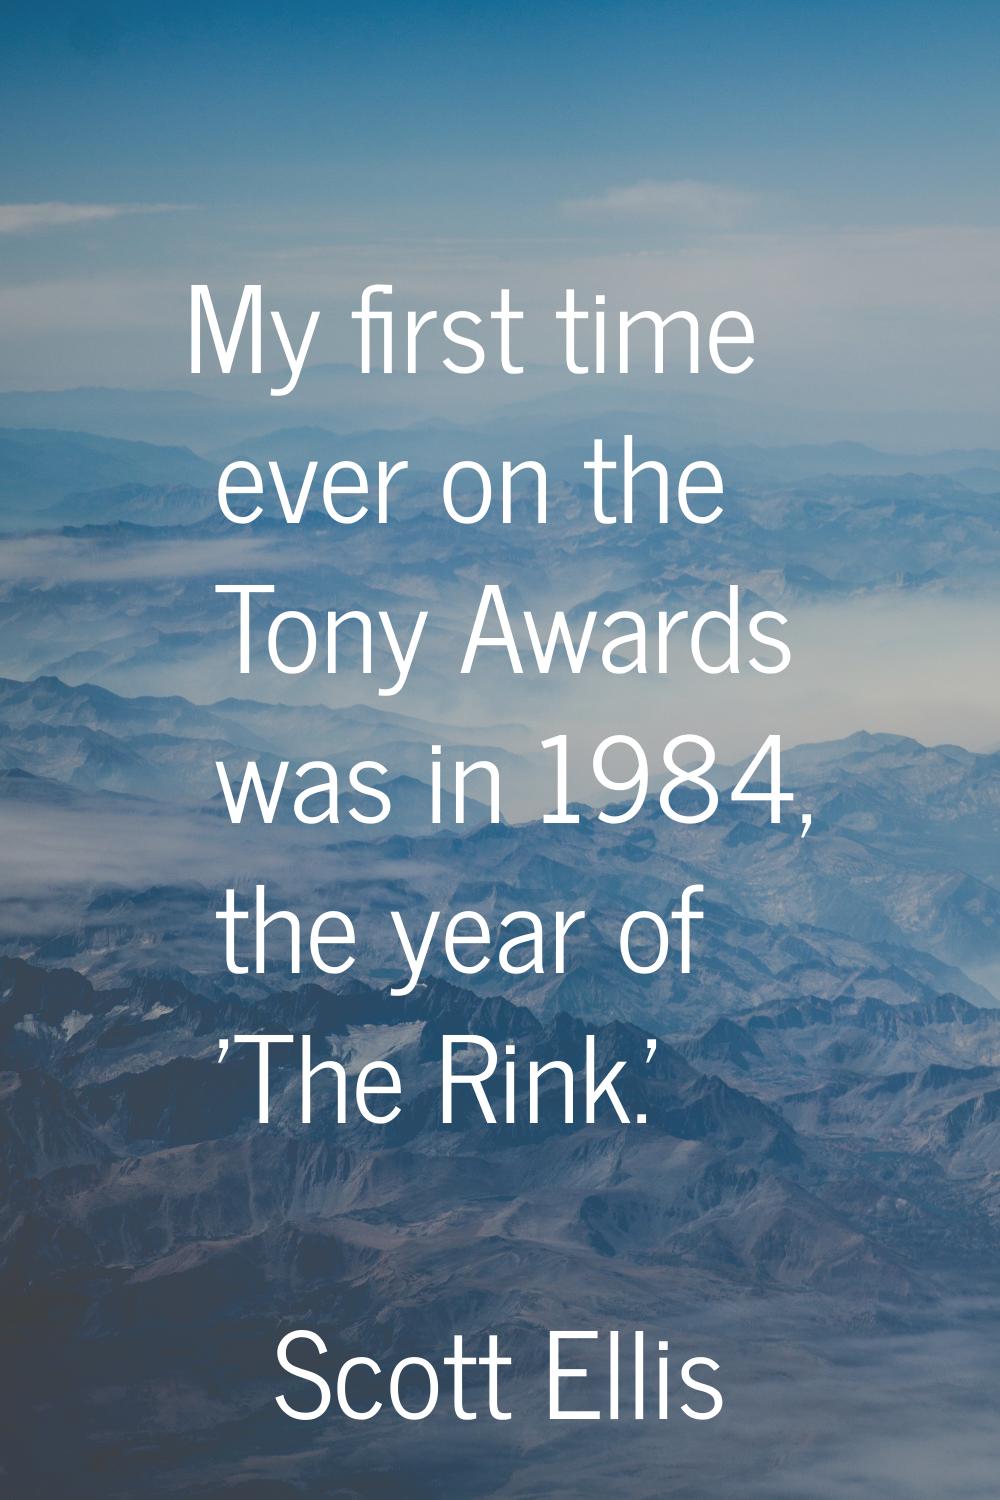 My first time ever on the Tony Awards was in 1984, the year of 'The Rink.'